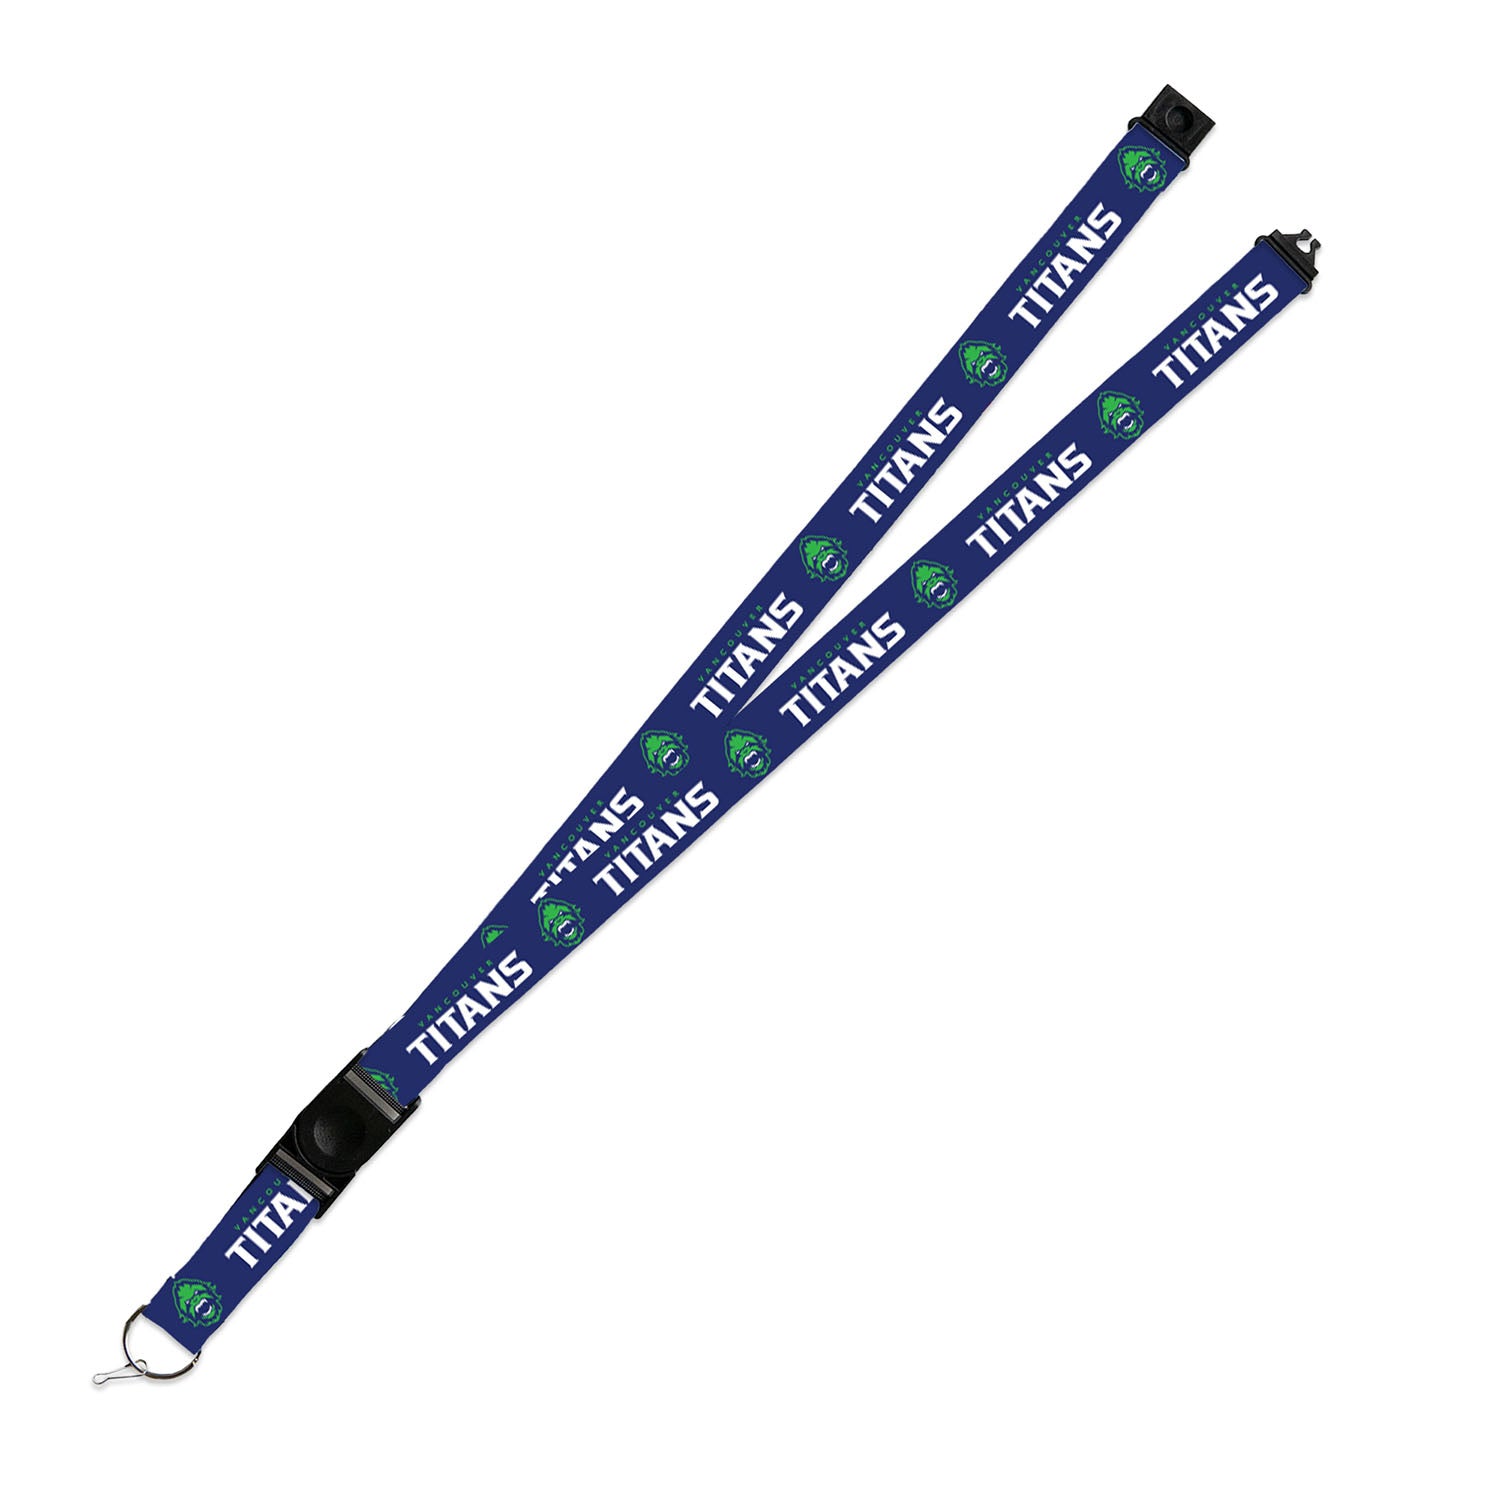 Vancouver Titans Lanyard in Blue - Front View